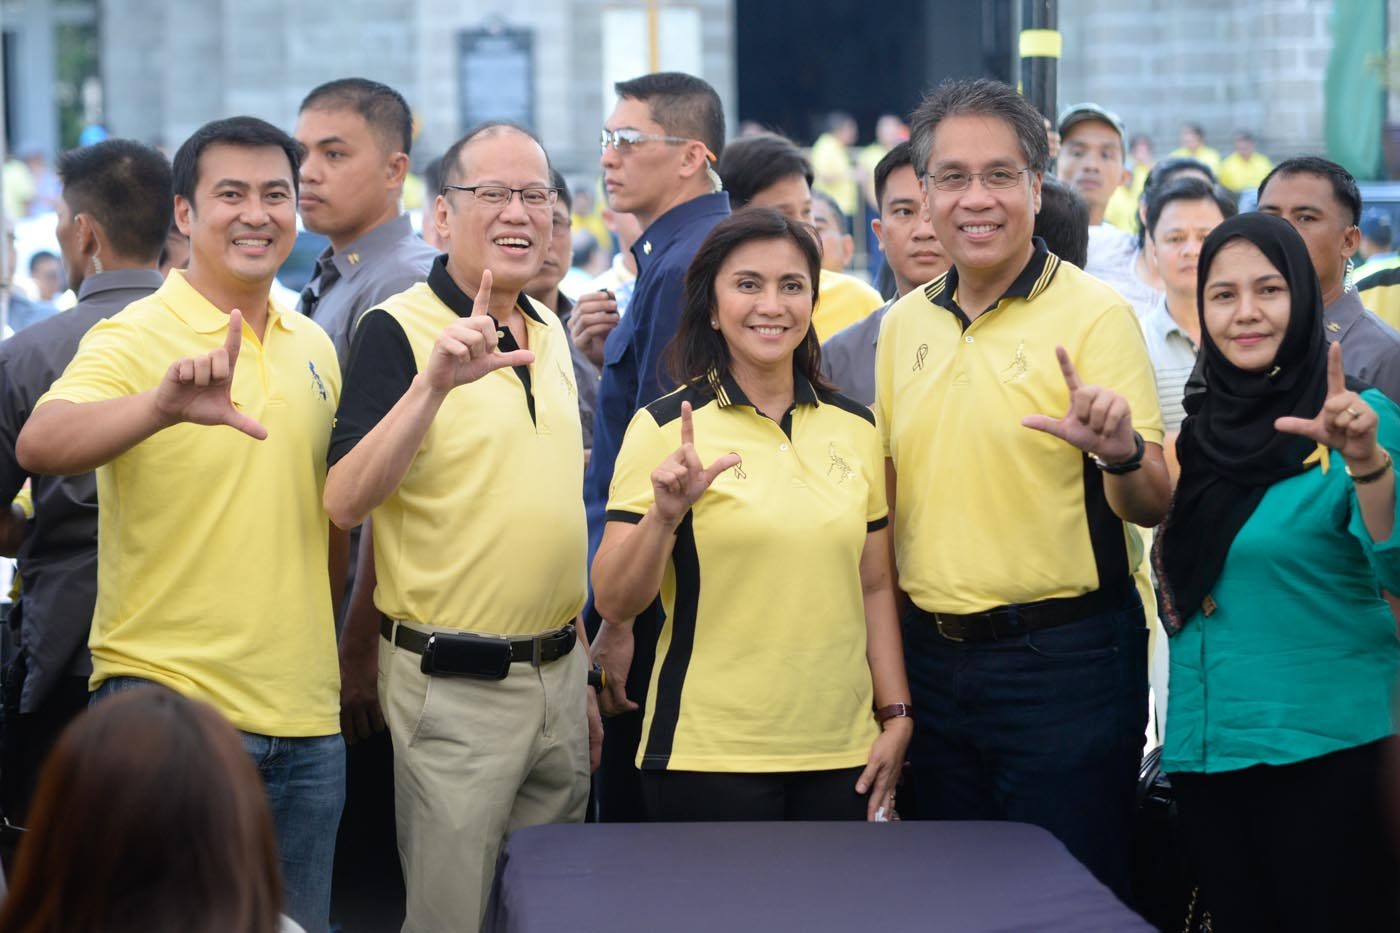 MASS BEFORE FILING. Administration tandem Mar Roxas and Leni Robredo, accompanied by President Benigno Aquino III and their family and supporters, outside the Manila Cathedral before they file their certificates of candidacy at the Comelec on October 15, 2015. Photo by Alecs Ongcal/Rappler 